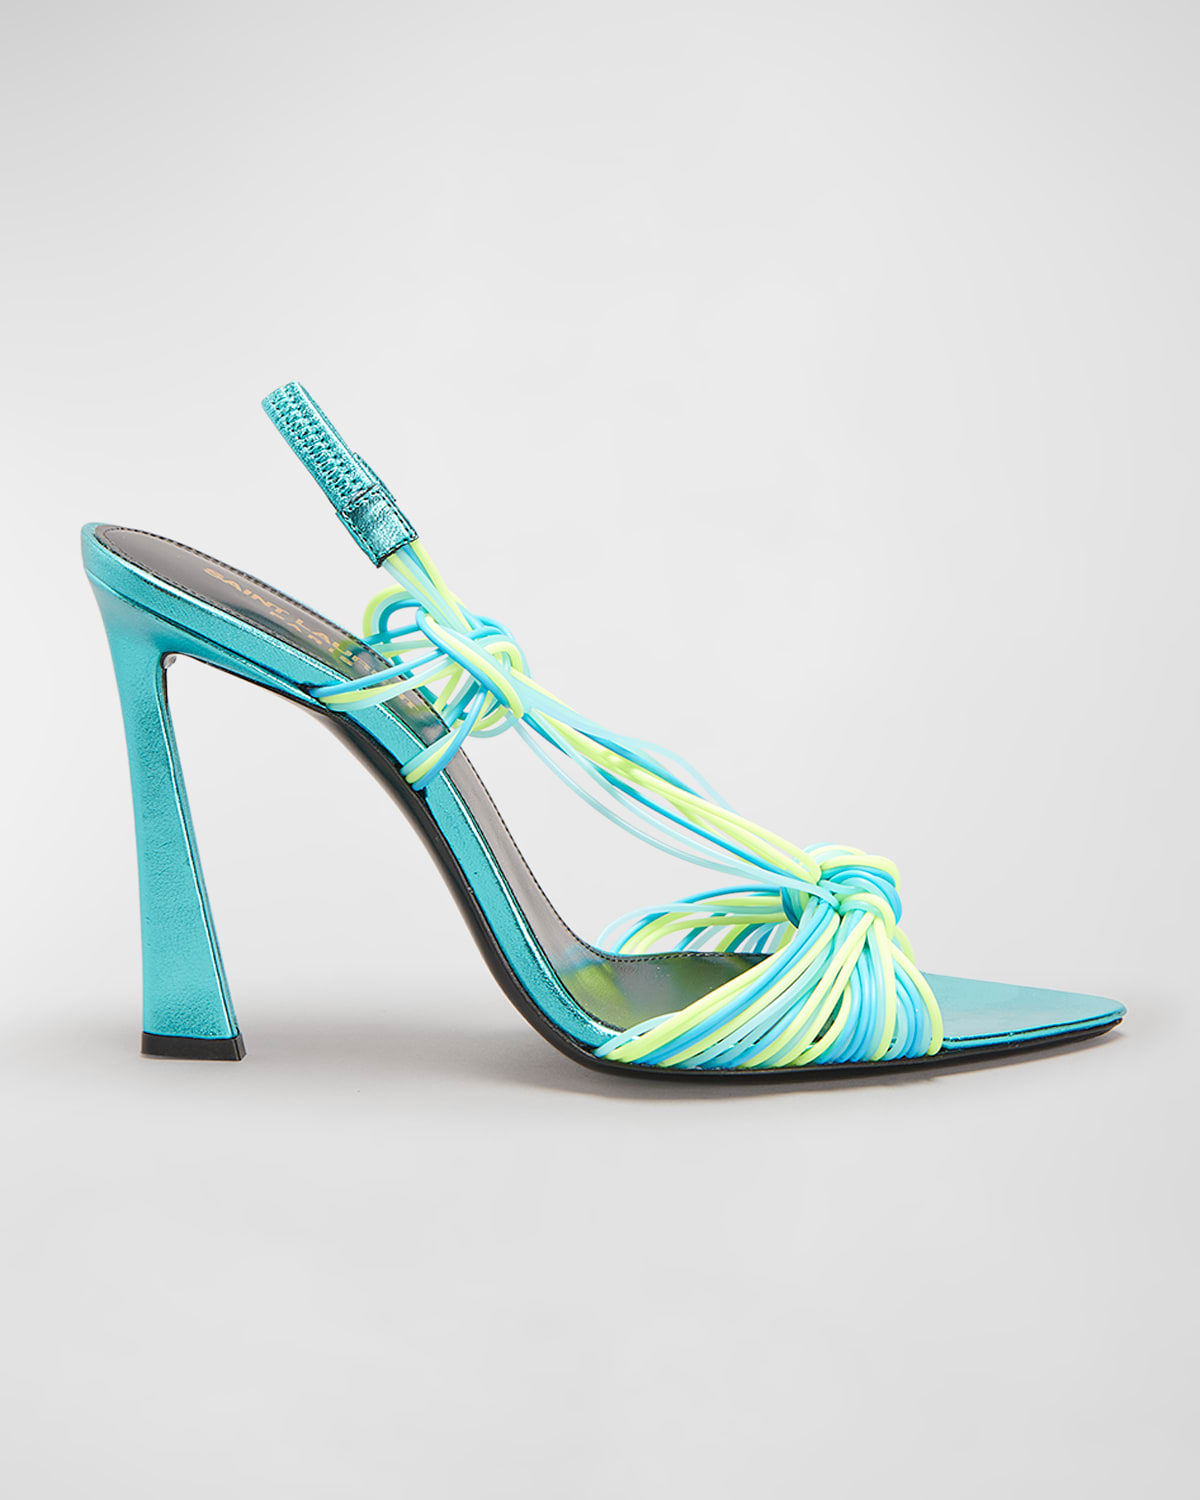 SAINT LAURENT GIPPY STRAPPY KNOT SLINGBACK SANDALS